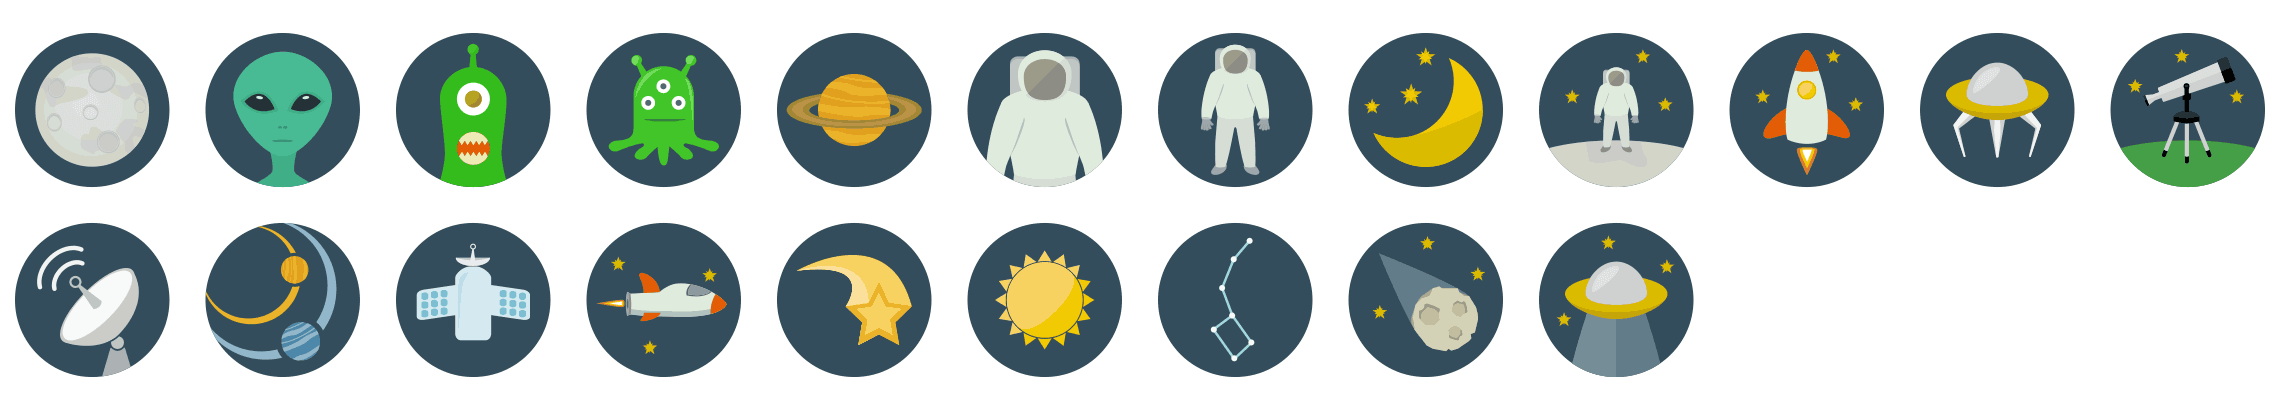 space-flat-icons-vol-1-preview